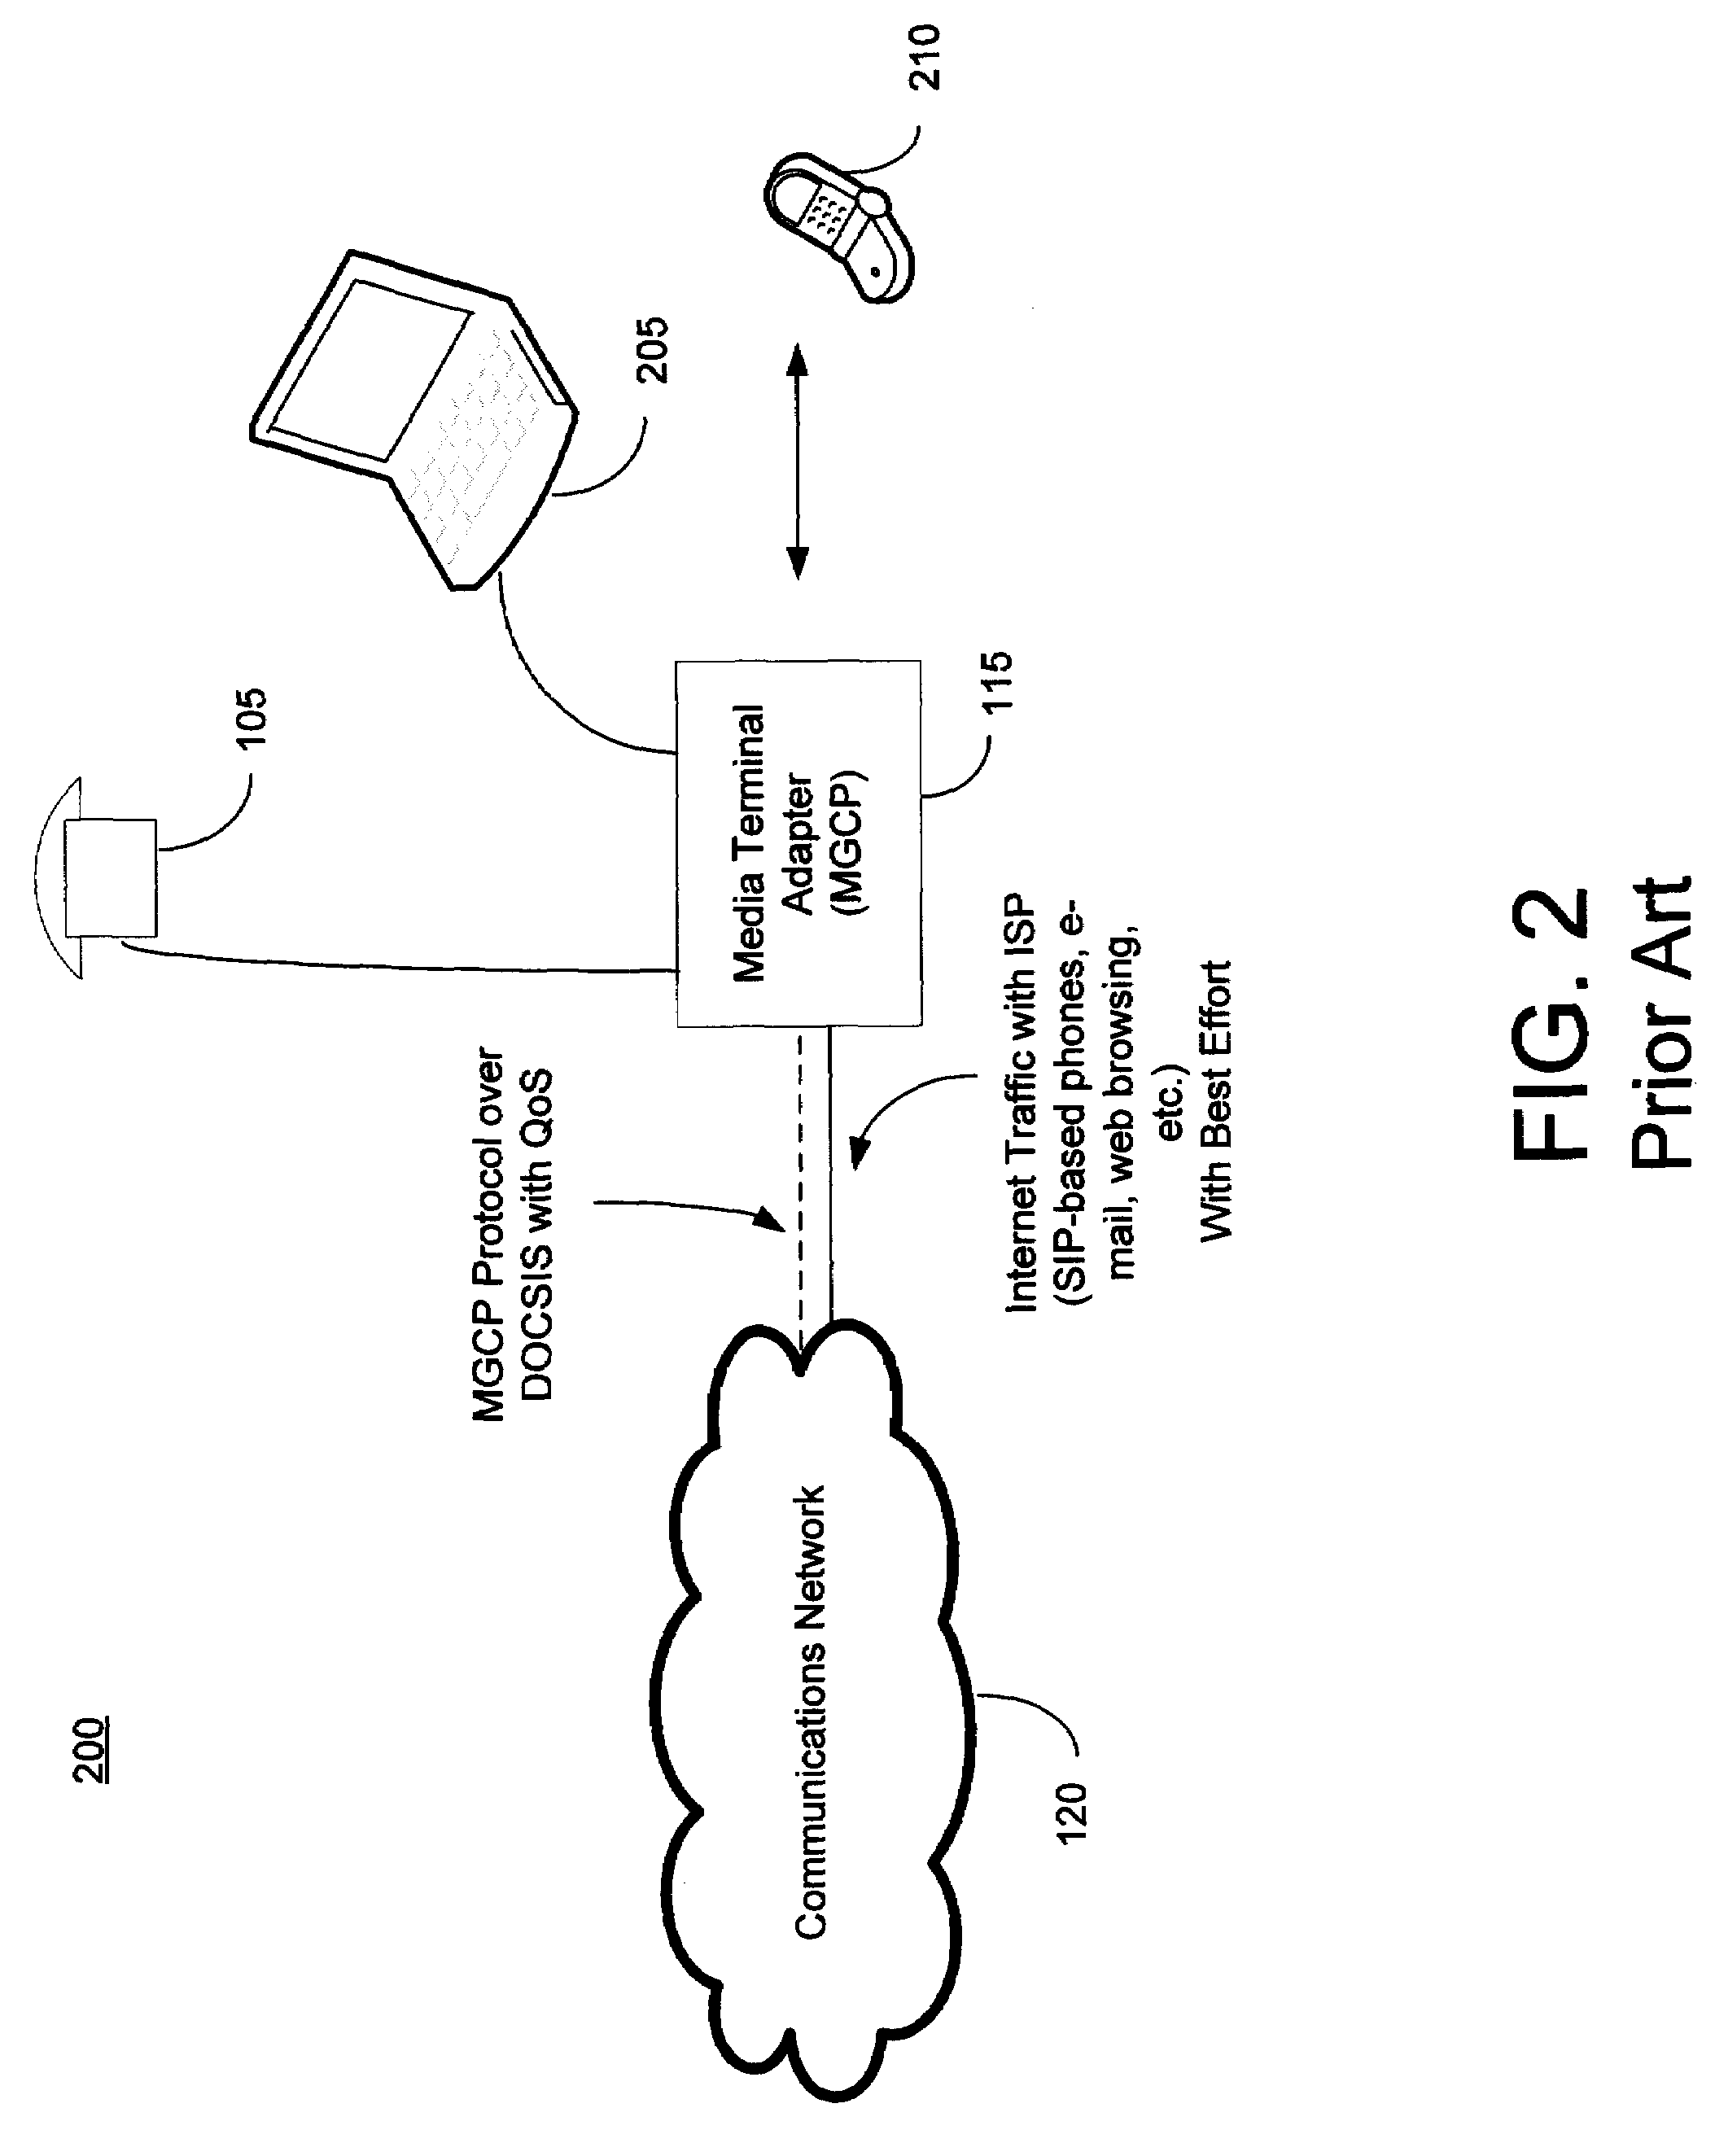 Media terminal adapter with session initiation protocol (SIP) proxy